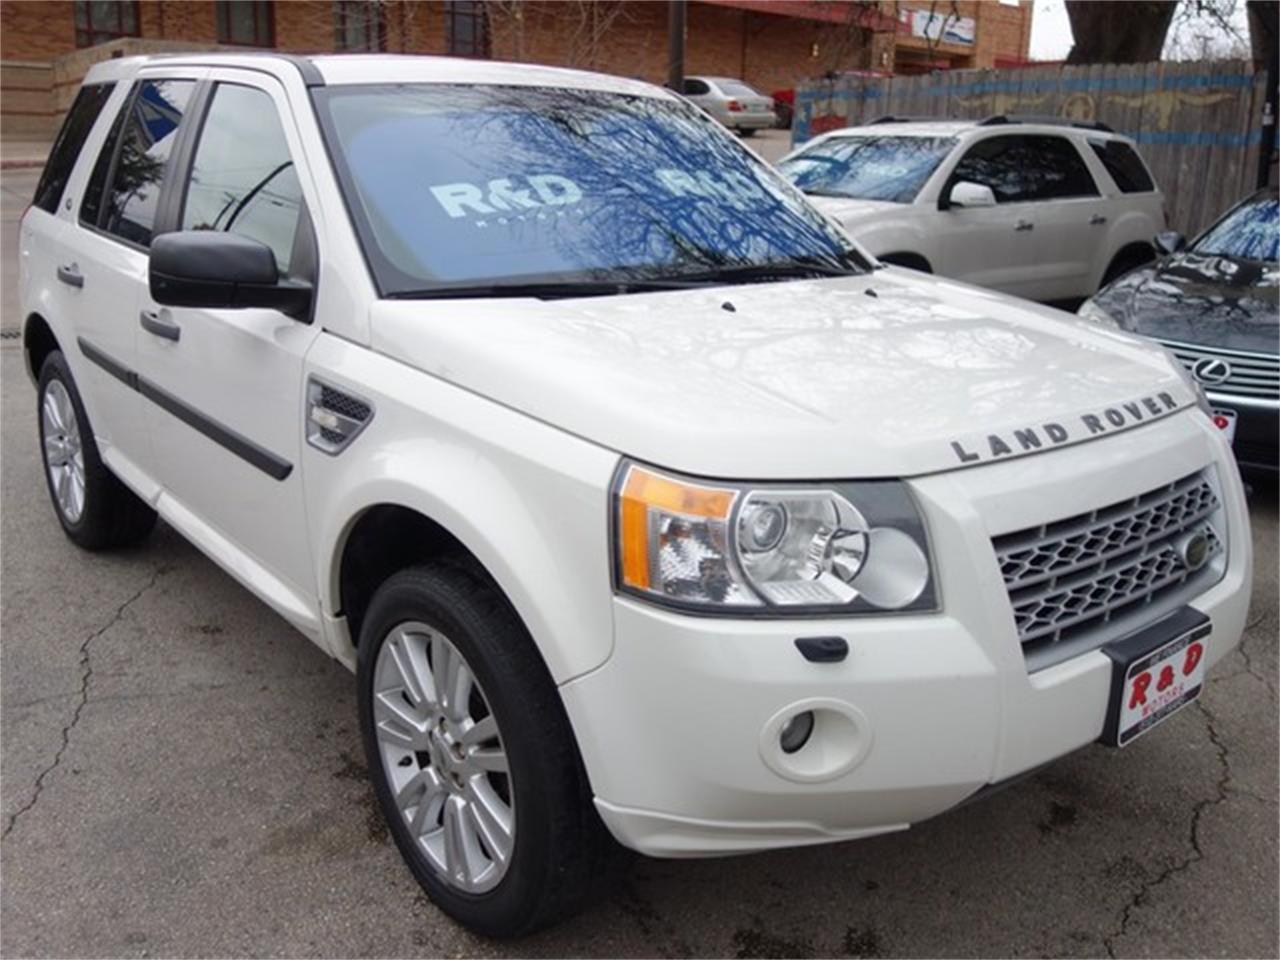 2010 Land Rover LR2 for sale in Austin, TX